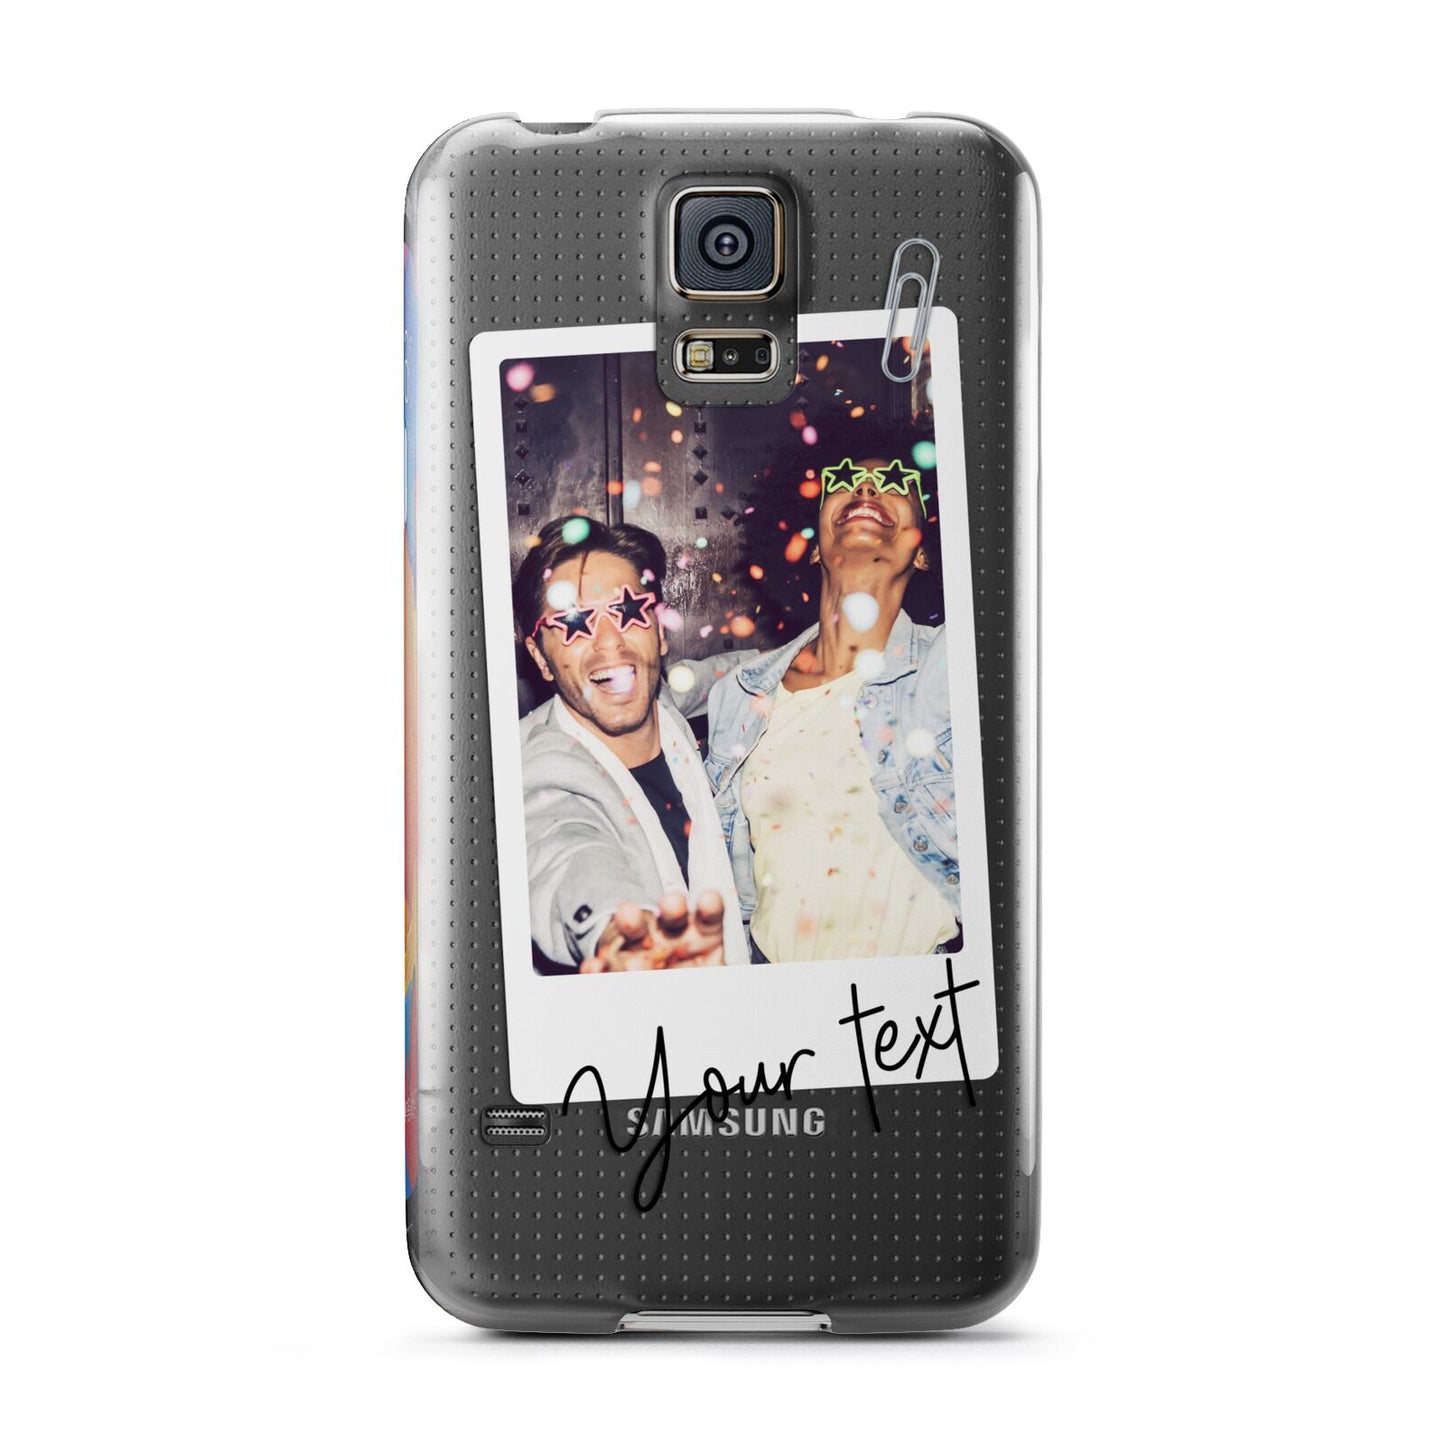 Personalised Photo with Text Samsung Galaxy S5 Case